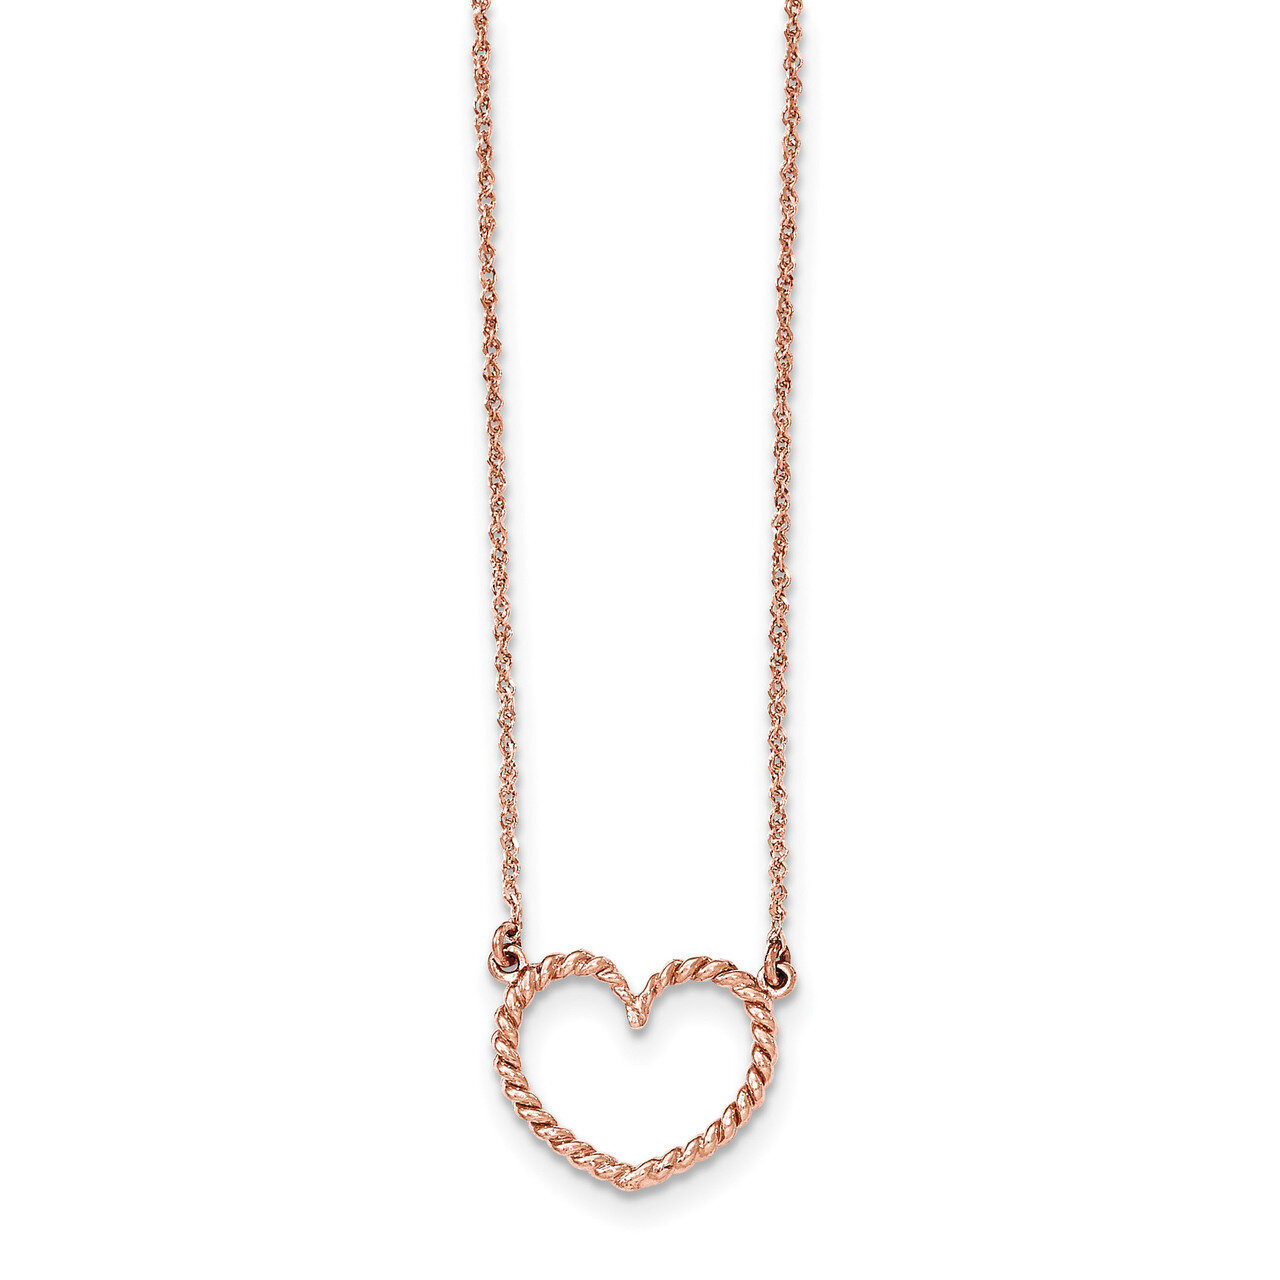 17 Inch Polished & Textured Heart Necklace 14k Rose Gold SF2291-17